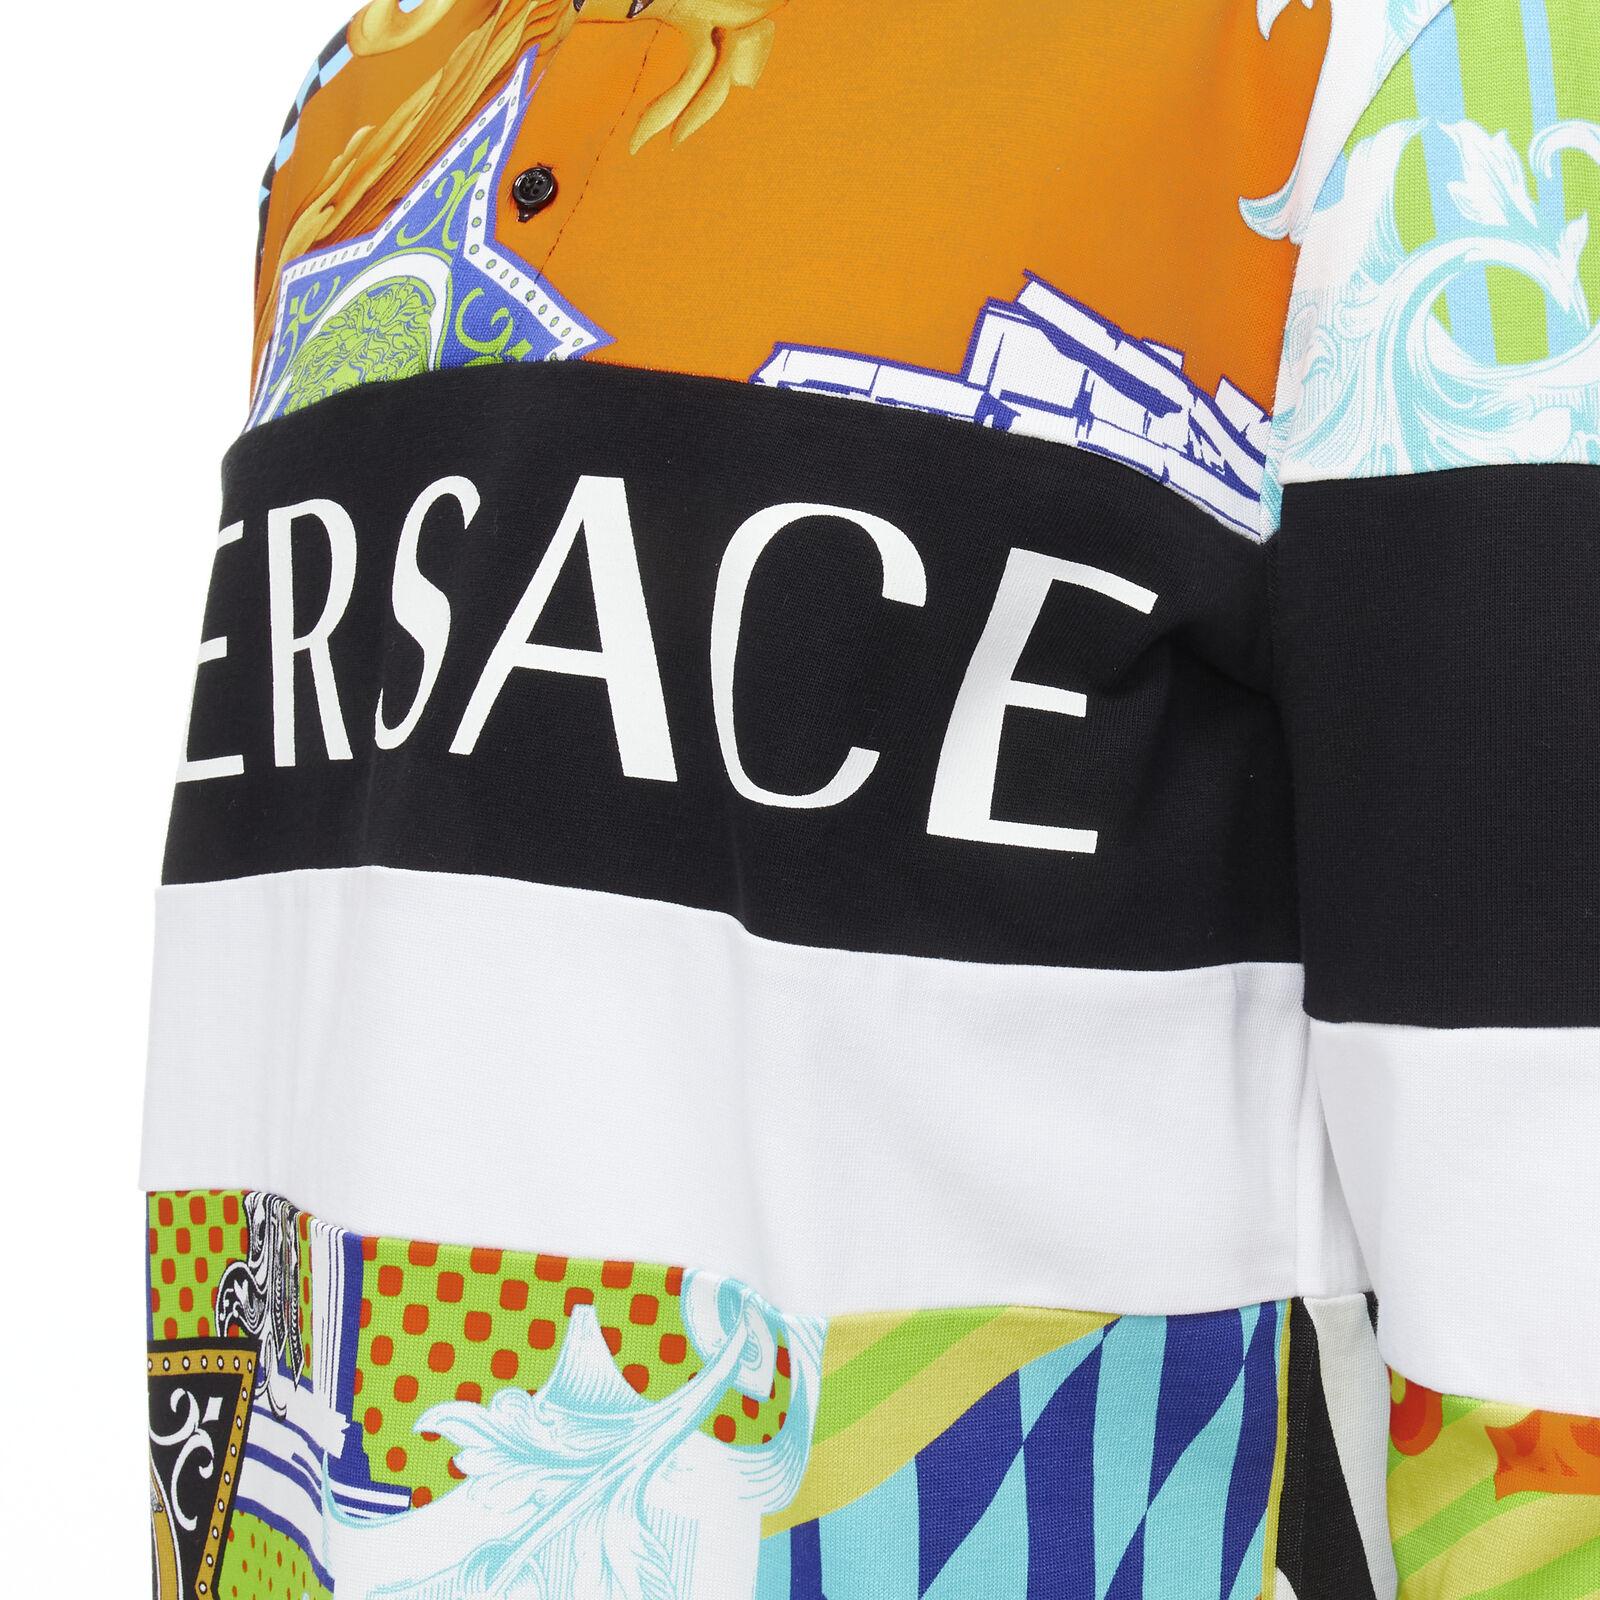 new VERSACE 2020 Runway Pop Temple Box logo patchwork polo shirt top L
Reference: TGAS/C00985
Brand: Versace
Designer: Donatella Versace
Model: A87193 A236036 A7000
Collection: Pop Temple Spring Summer 2020 Limited Edition - Runway
Material: